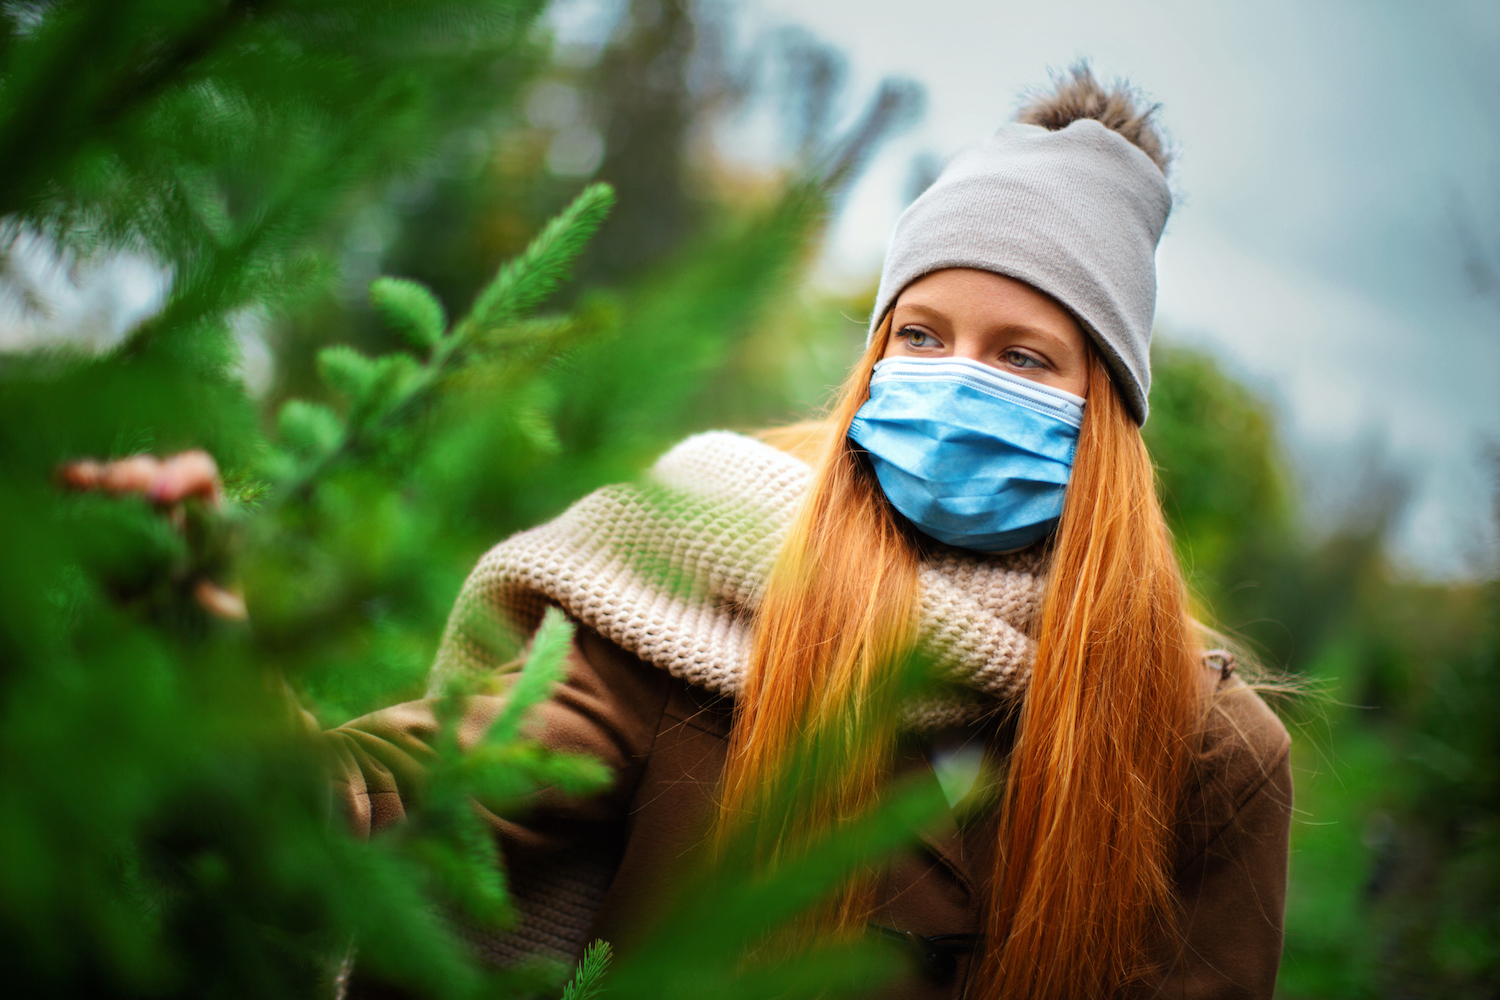 Christmas Tree Shopping Amidst a Global Pandemic: What to Expect